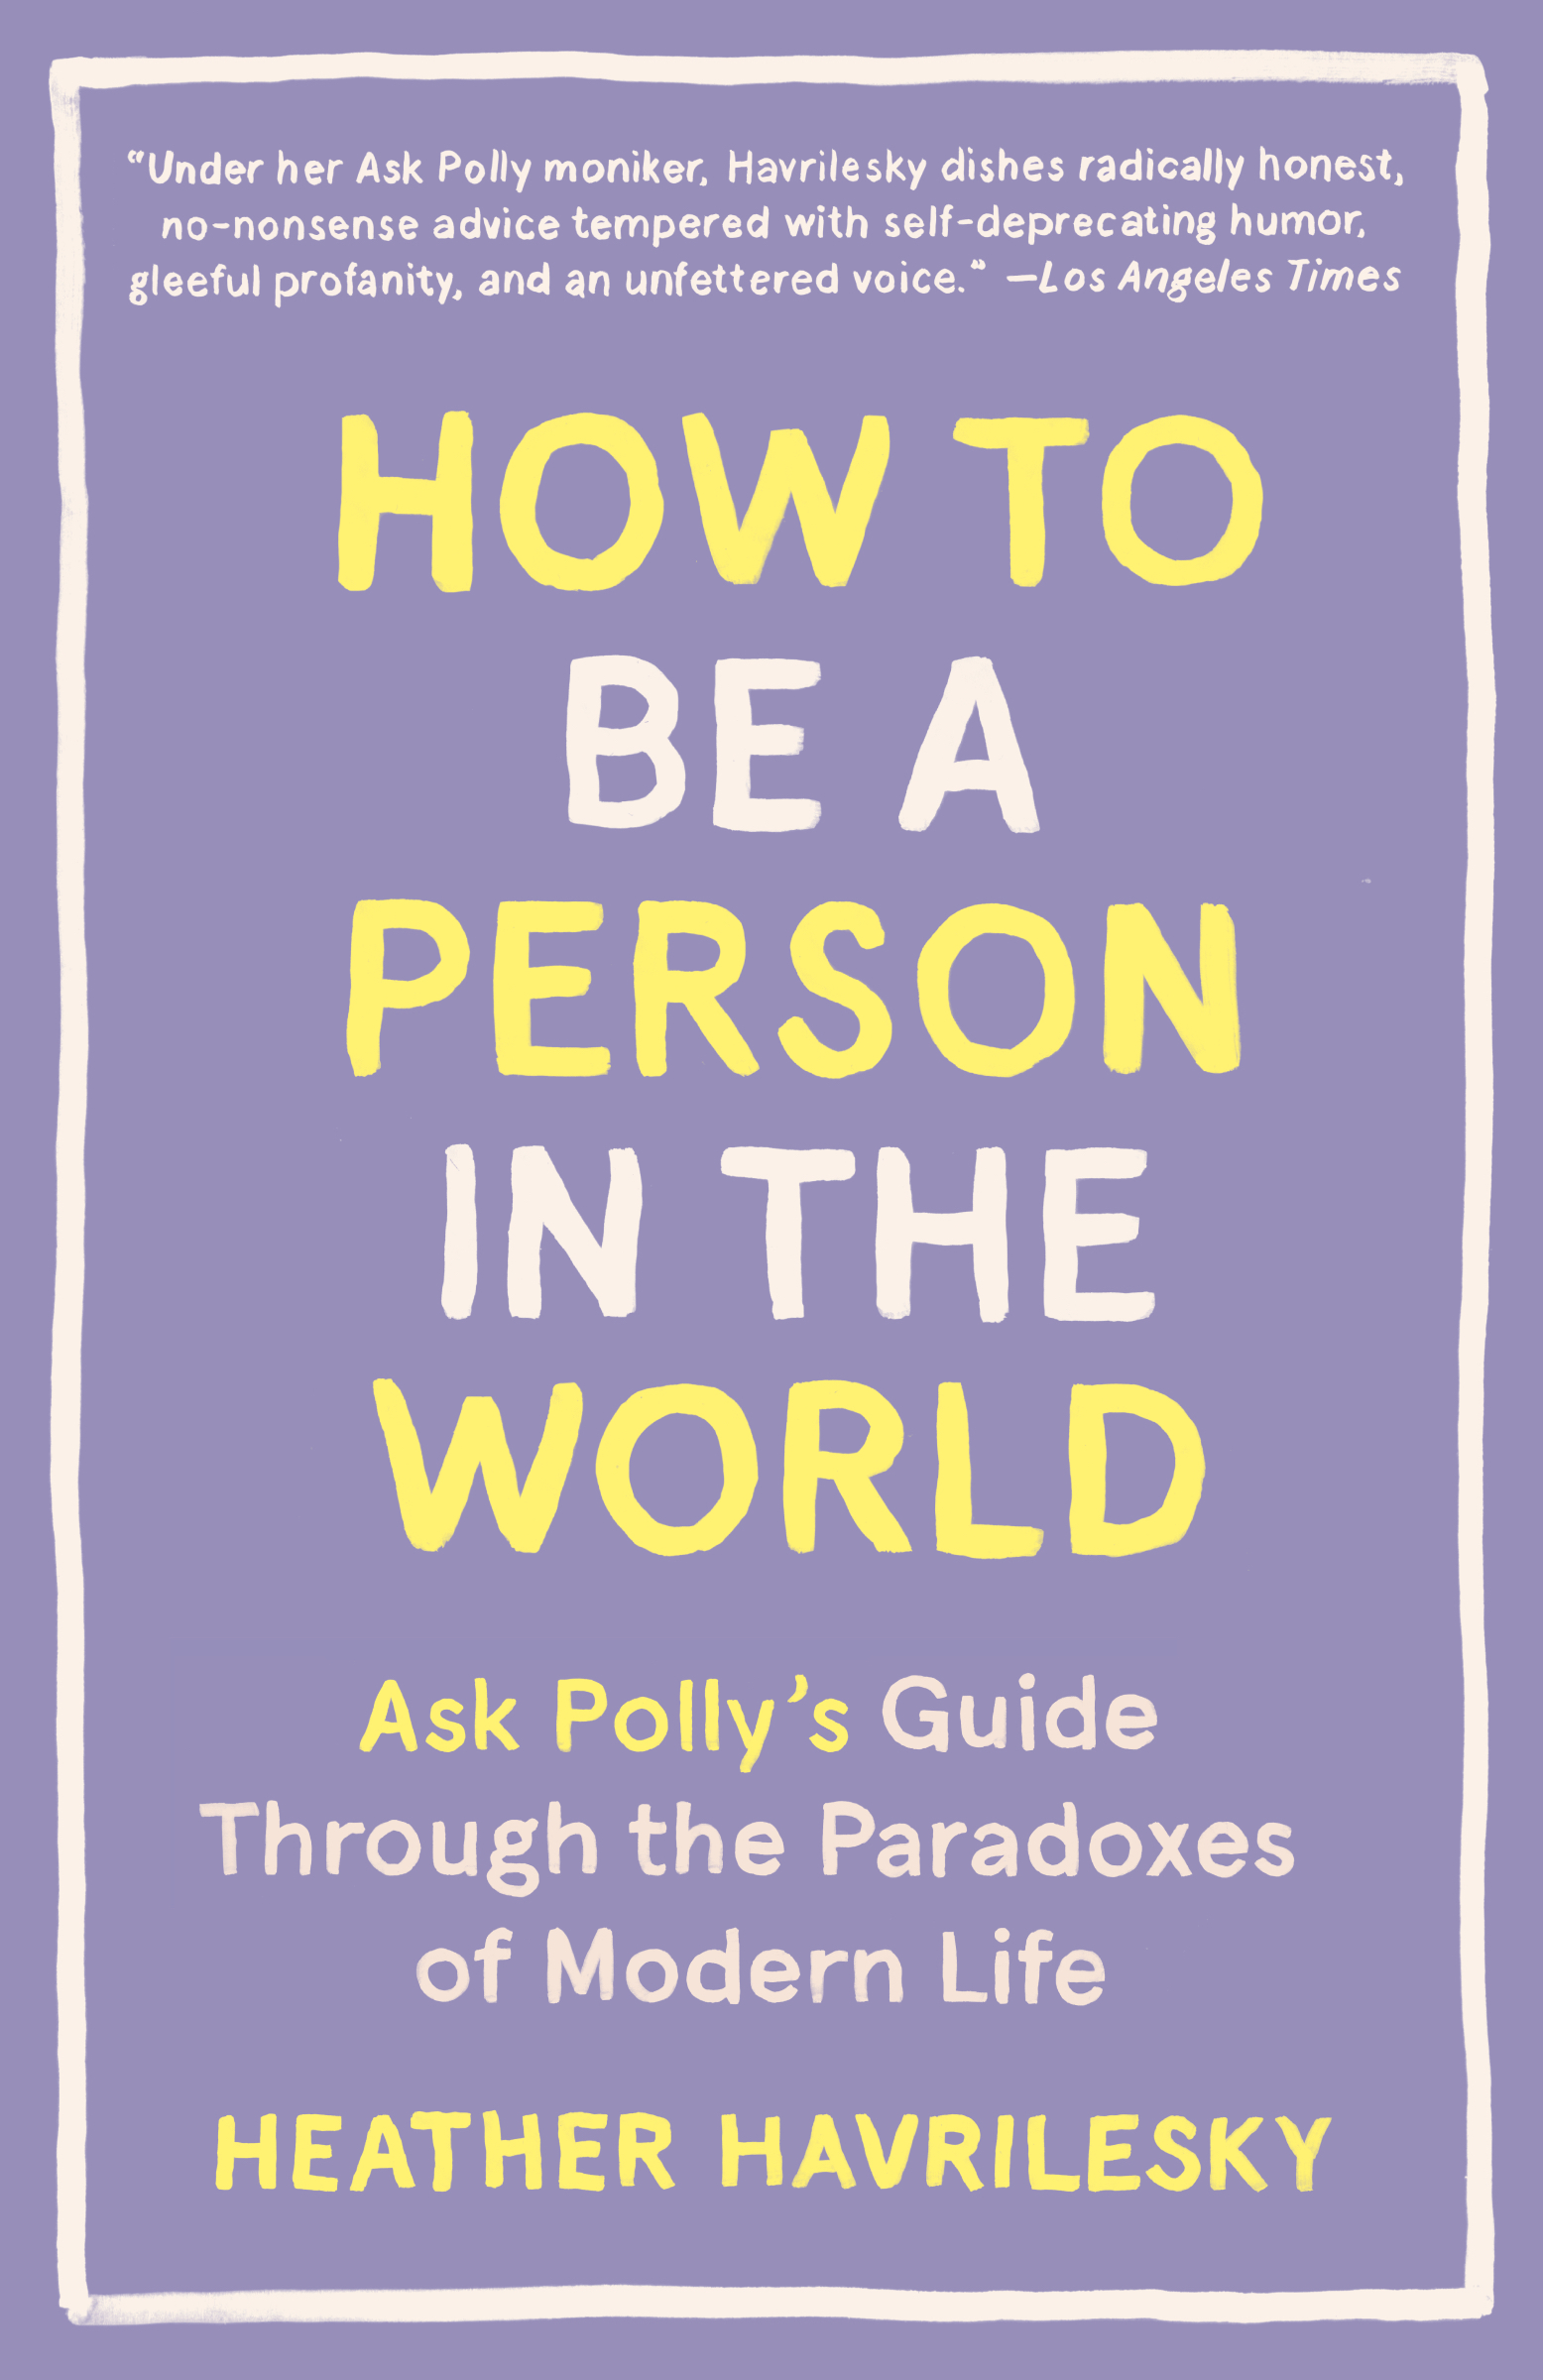 how to be a person in the world pb.jpg